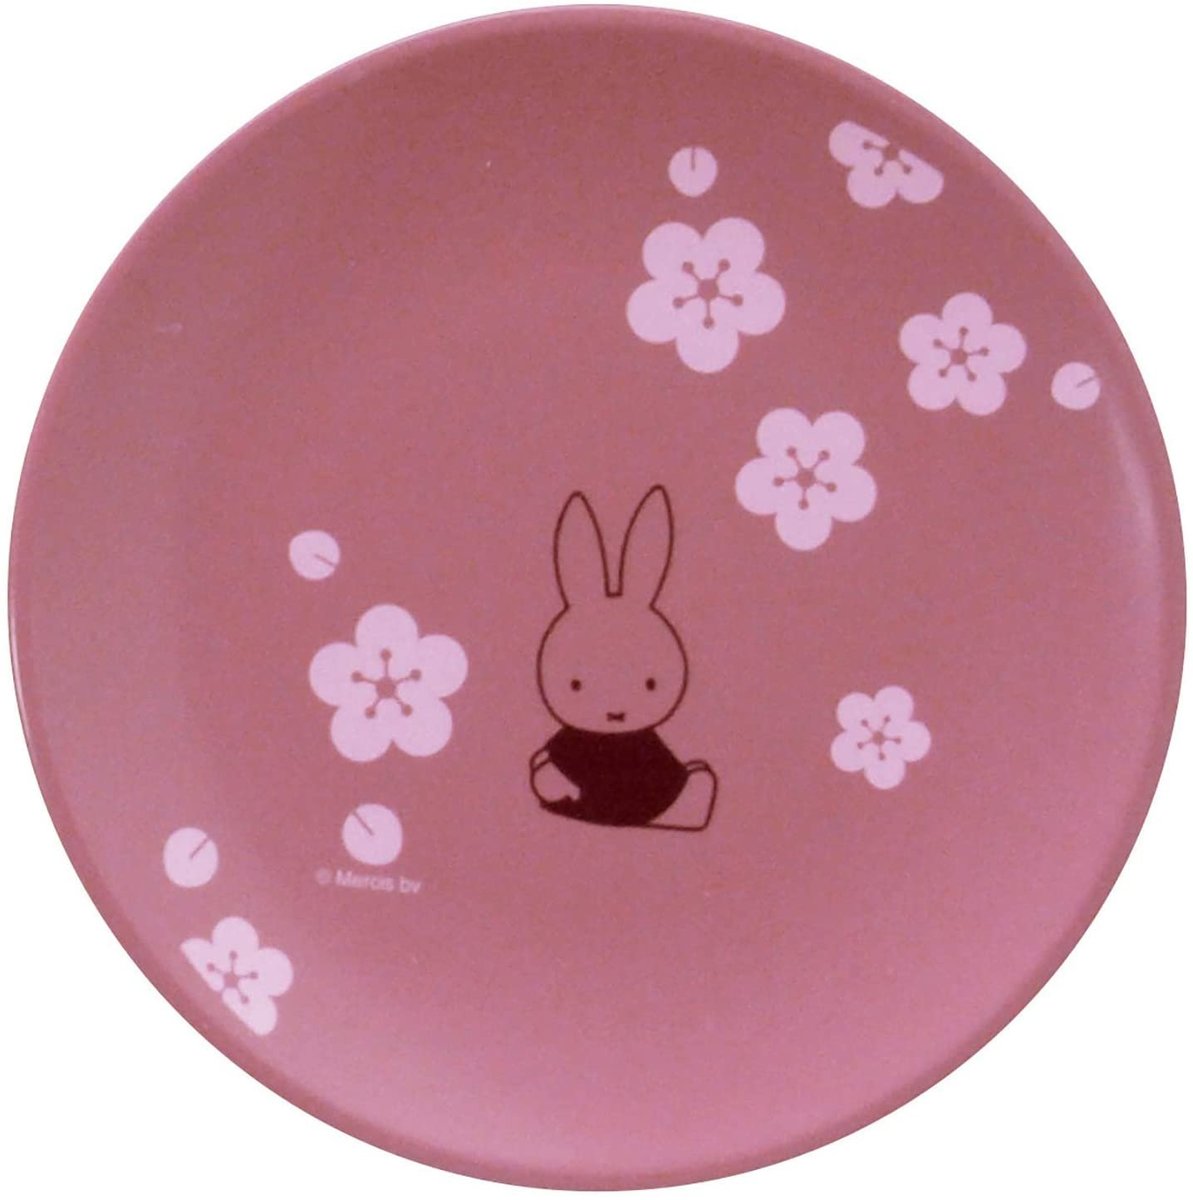 Japan Miffy plate Mini Dish Lacquer Plum Scarlett Miffy Mini Soy Sauce Plate Parallel Import